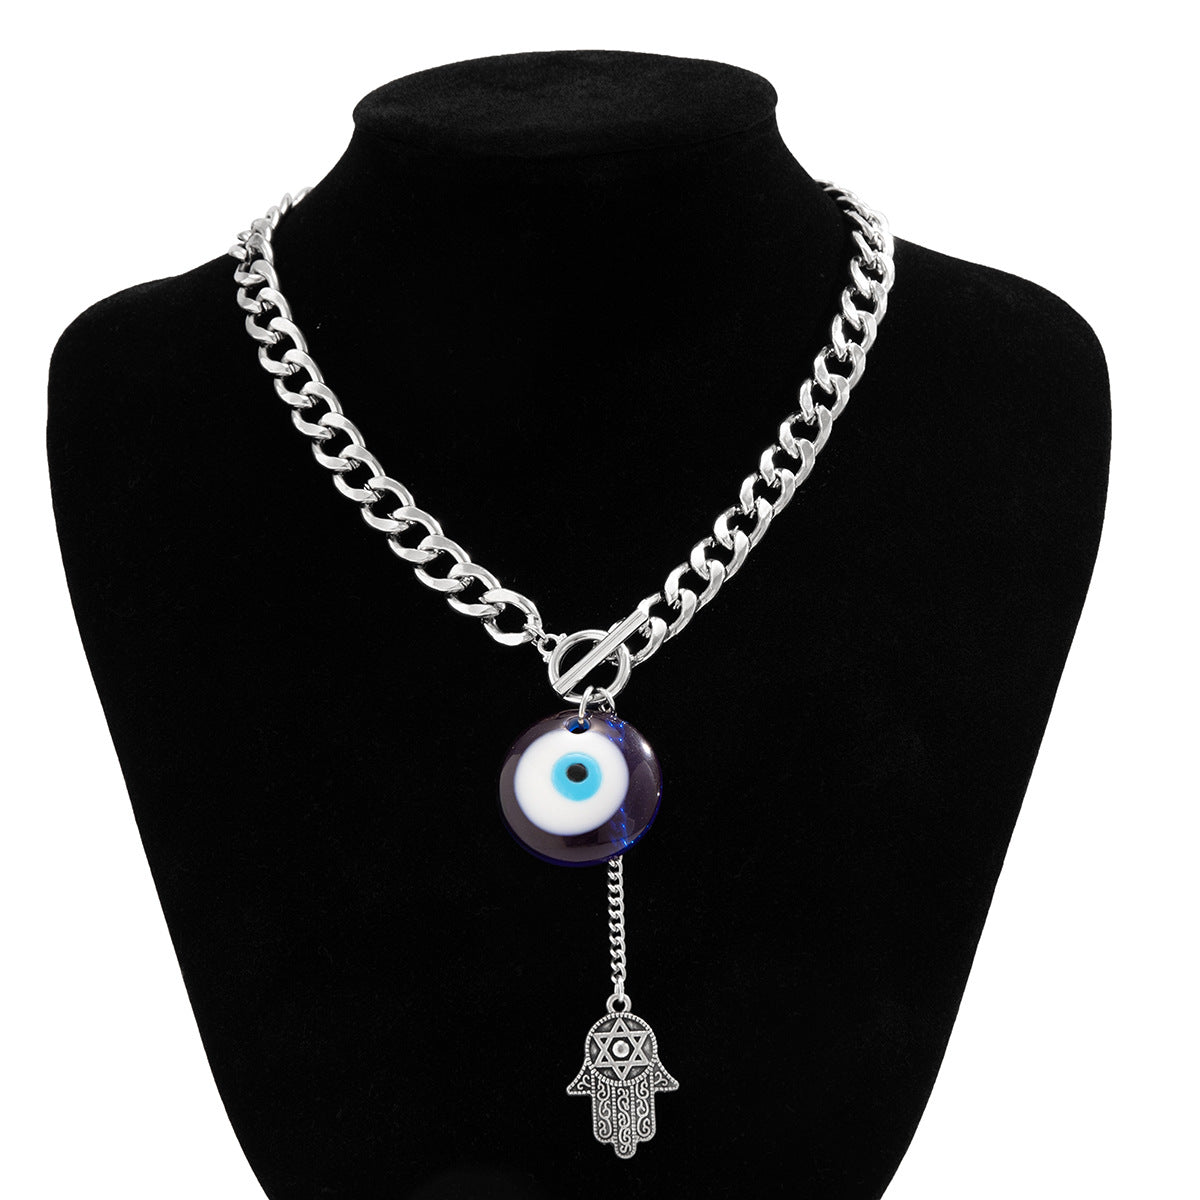 Blue Eye Pendant Necklace with a Touch of Bergamot Flavor